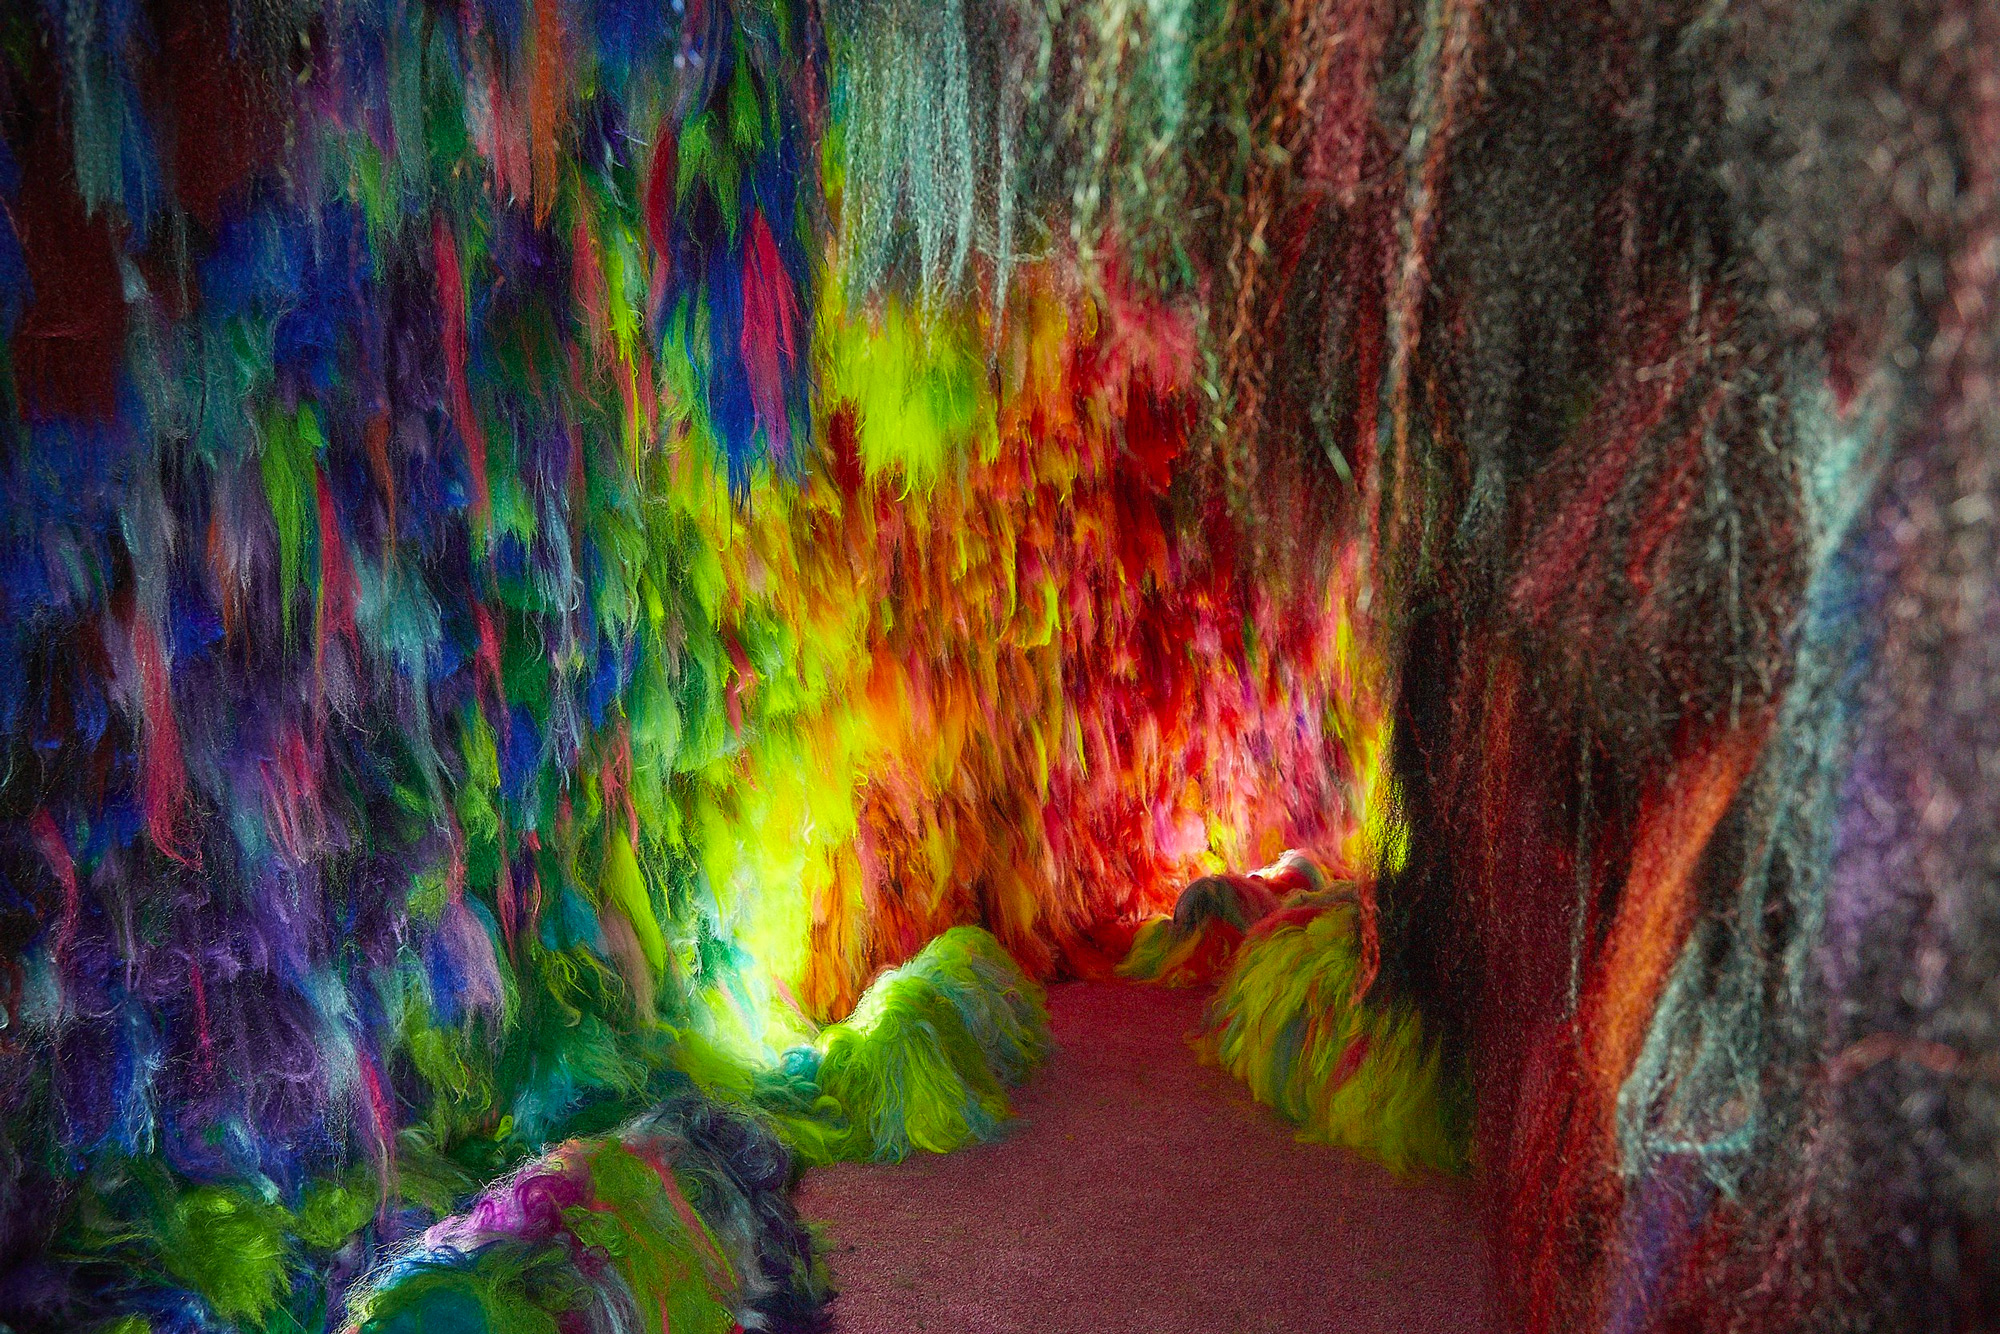 Textural Installations by Shoplifter Immerse Visitors in Furry Neon Caves